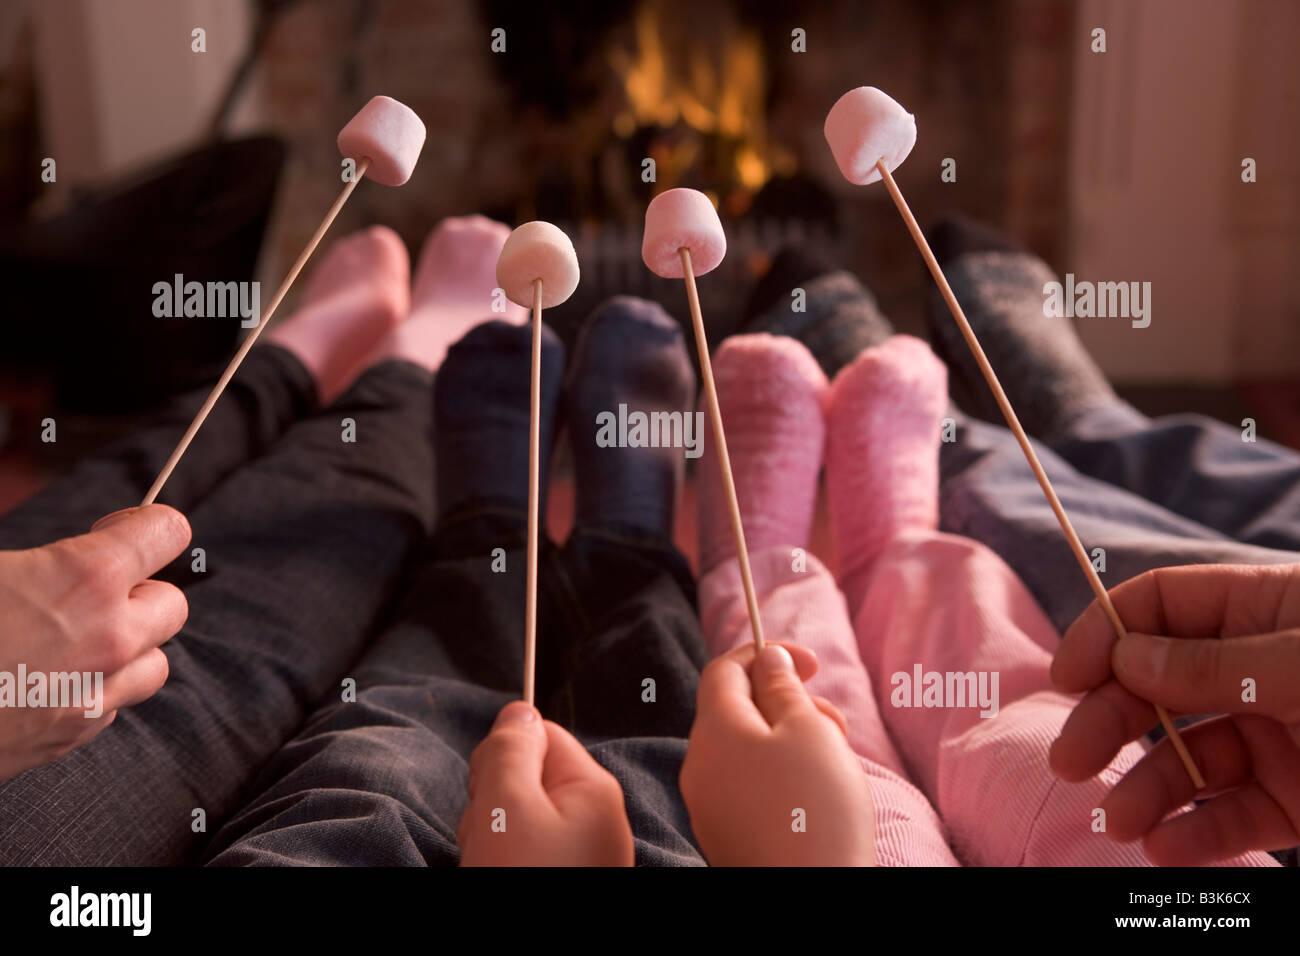 Feet warming at a fireplace with marshmallows on sticks Stock Photo